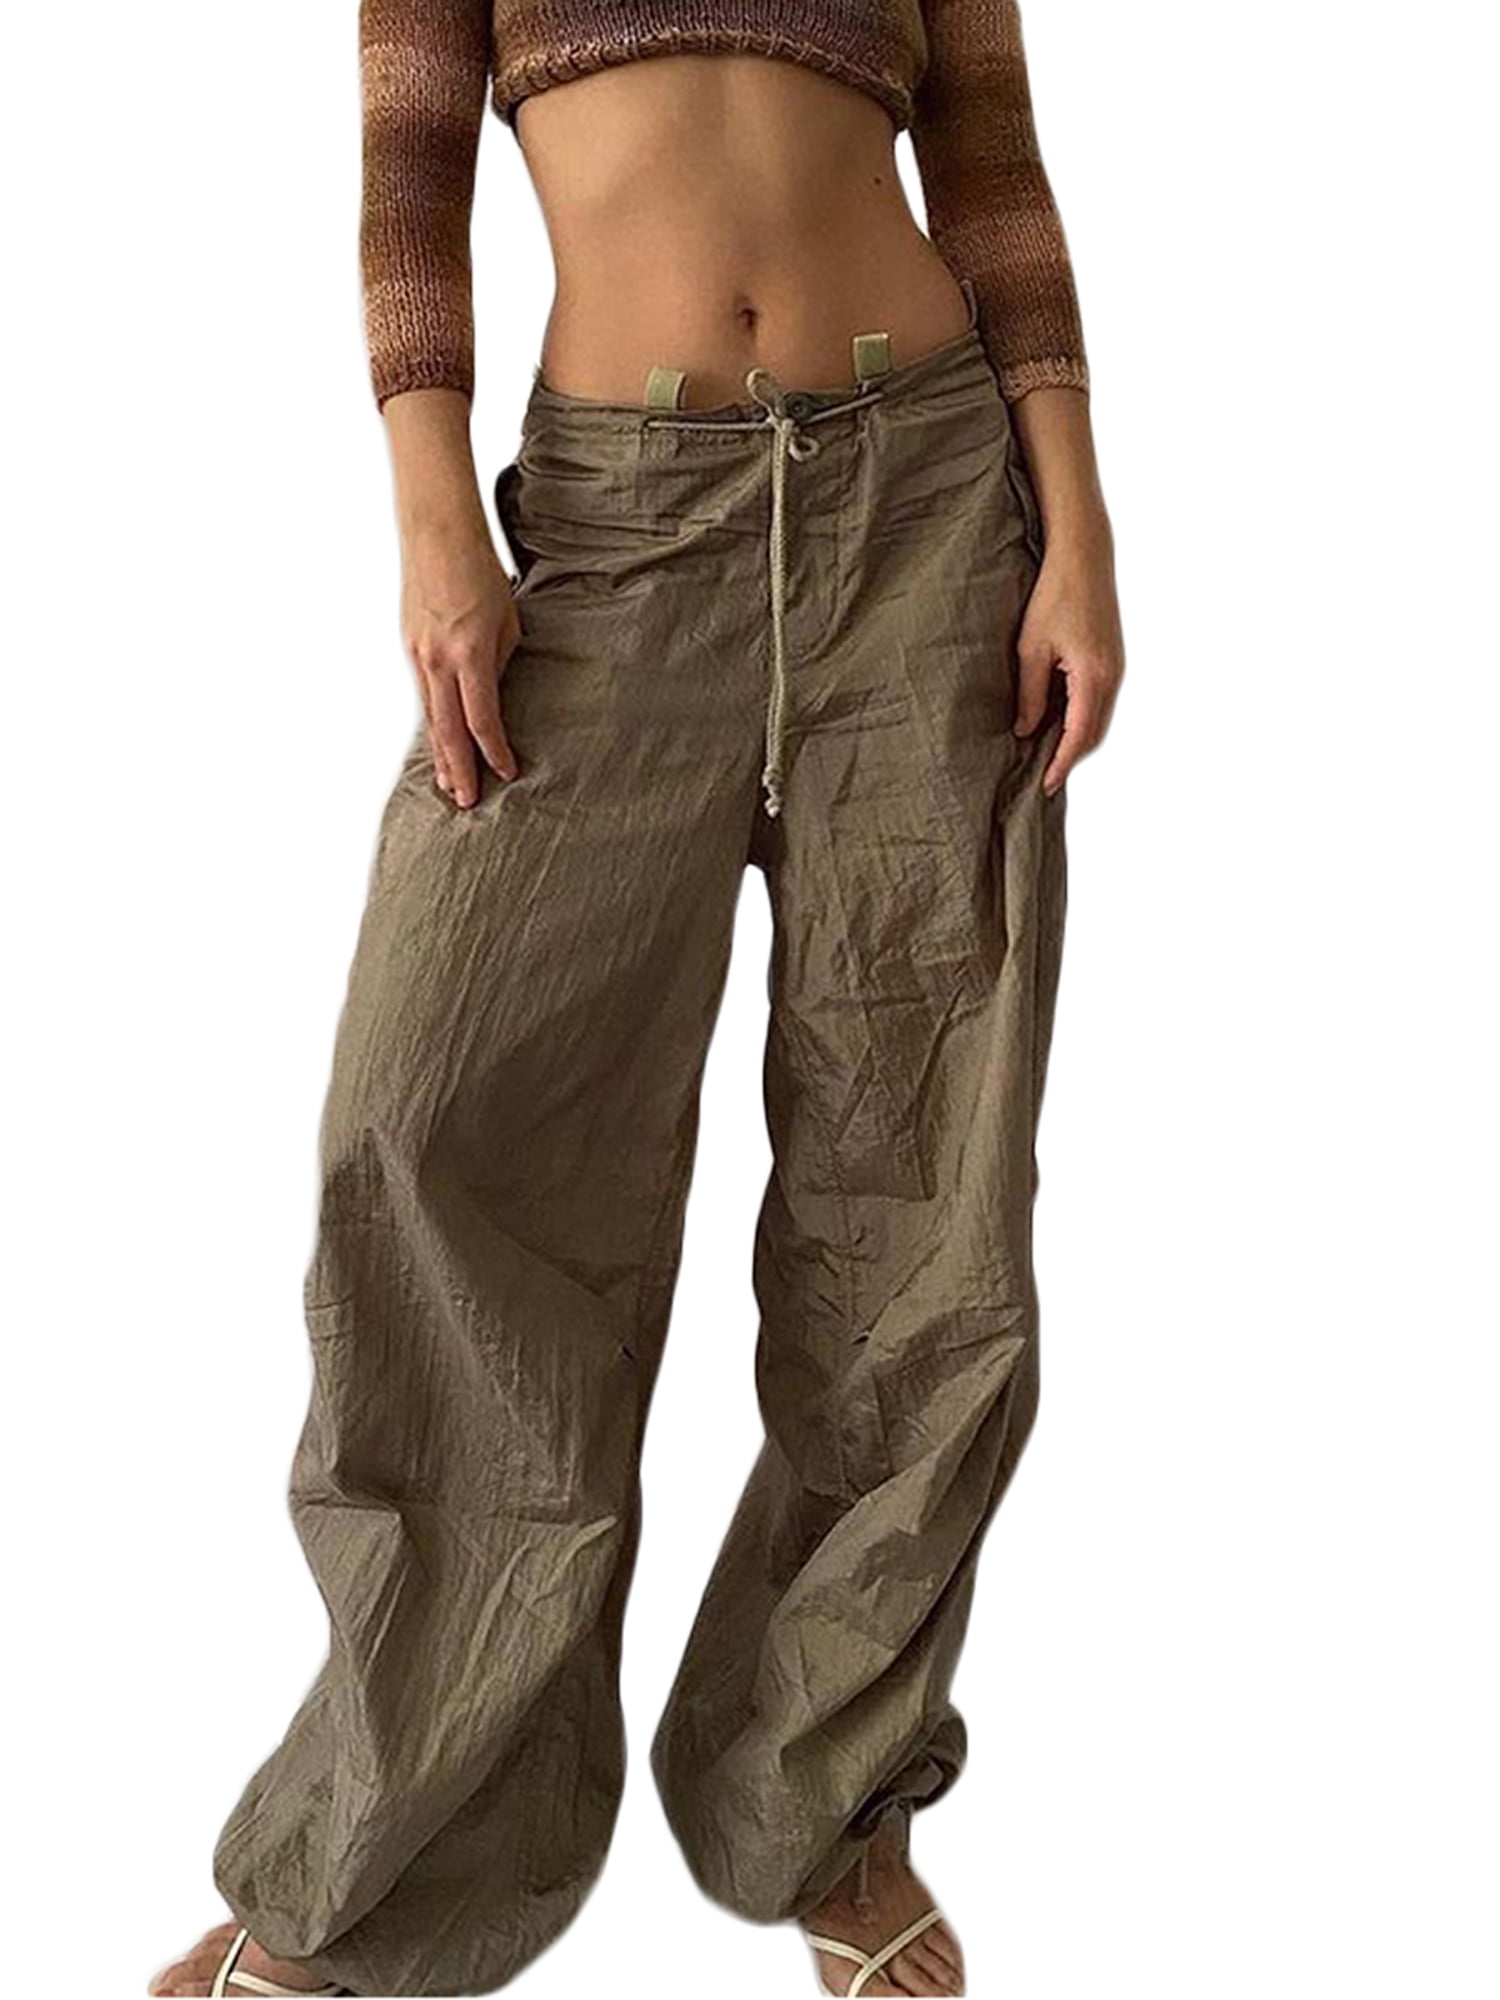 ALLNeon Vintage Slim Flare Brown Low Rise Pants With Aesthetics Y2K  Streetwear Fashion Outfit For Casual Wear 90s Style X0629 From Cow01,  $16.91